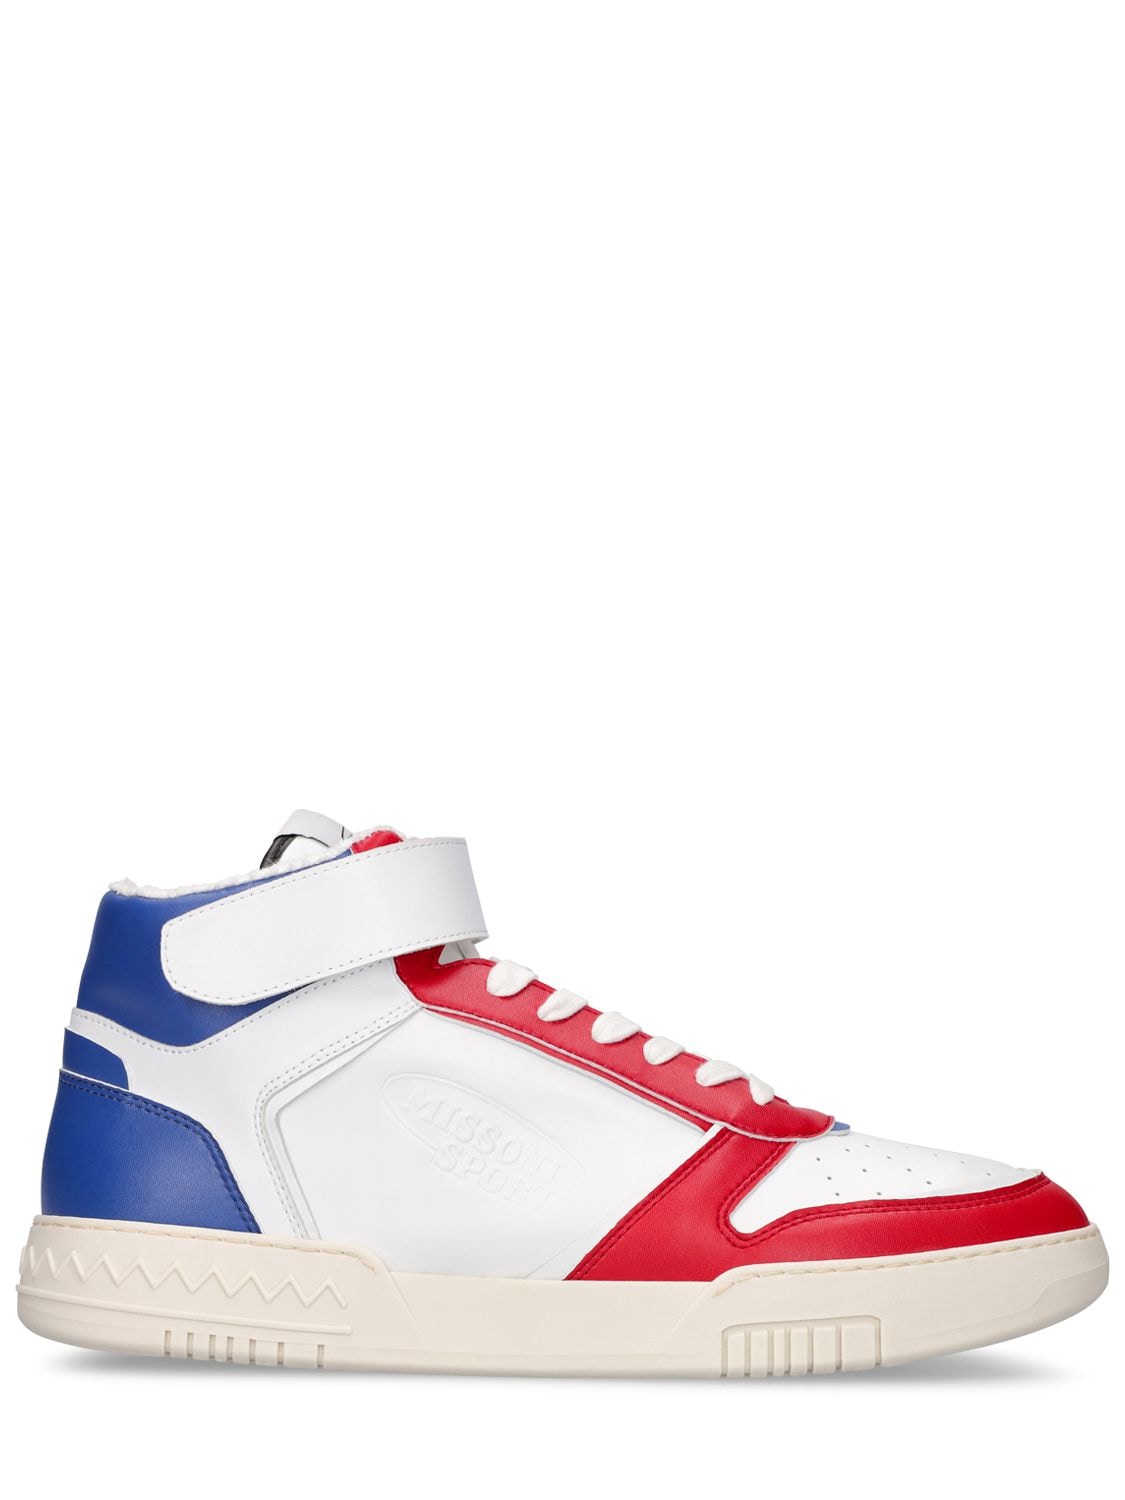 Missoni Basket New High Sneakers In Red,white,blue